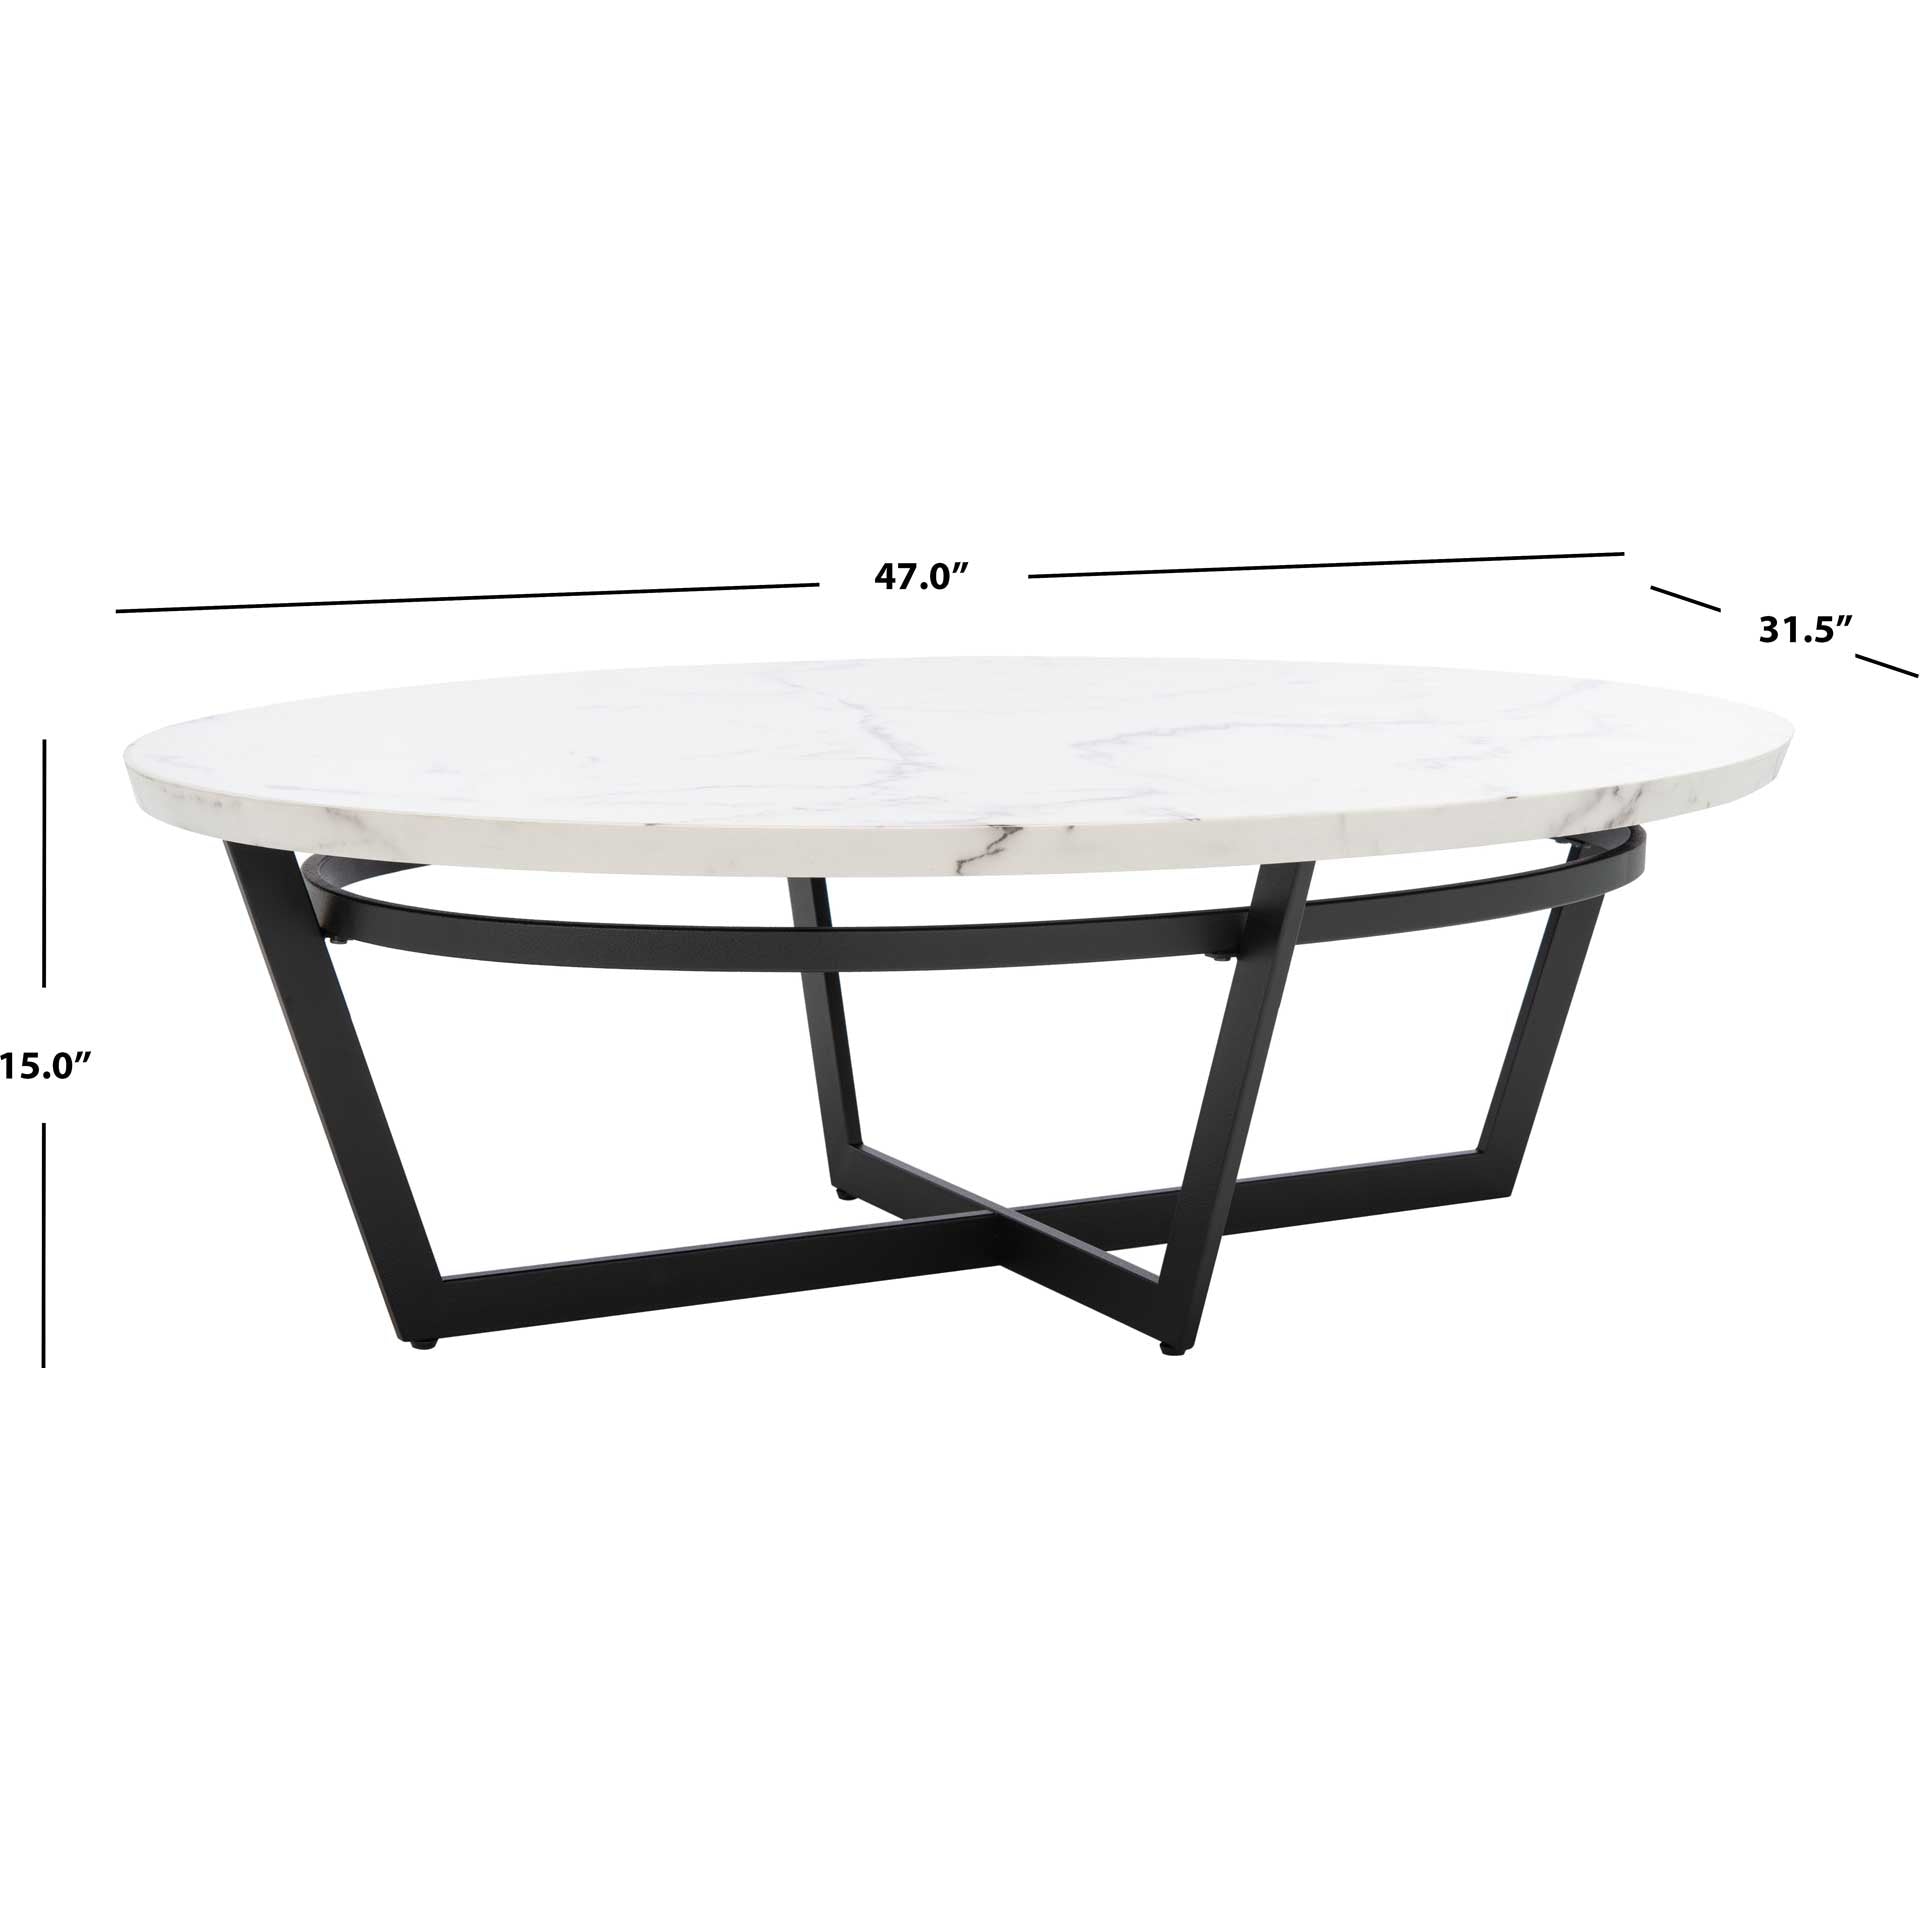 Pluto Oval Coffee Table White Marble/Black